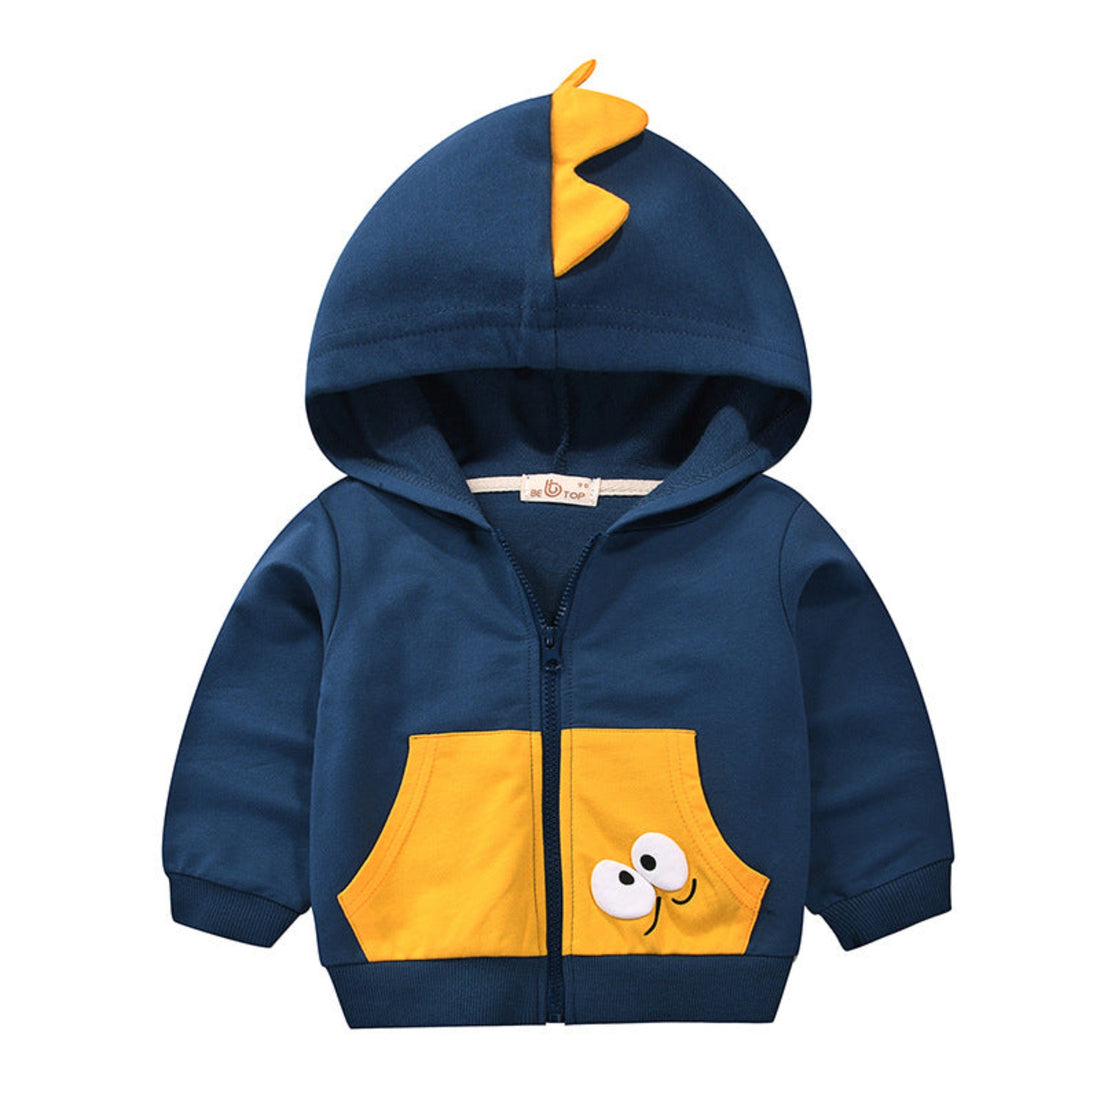 Baby clothing for autumn, featuring soft and warm fabric for transitional weather.